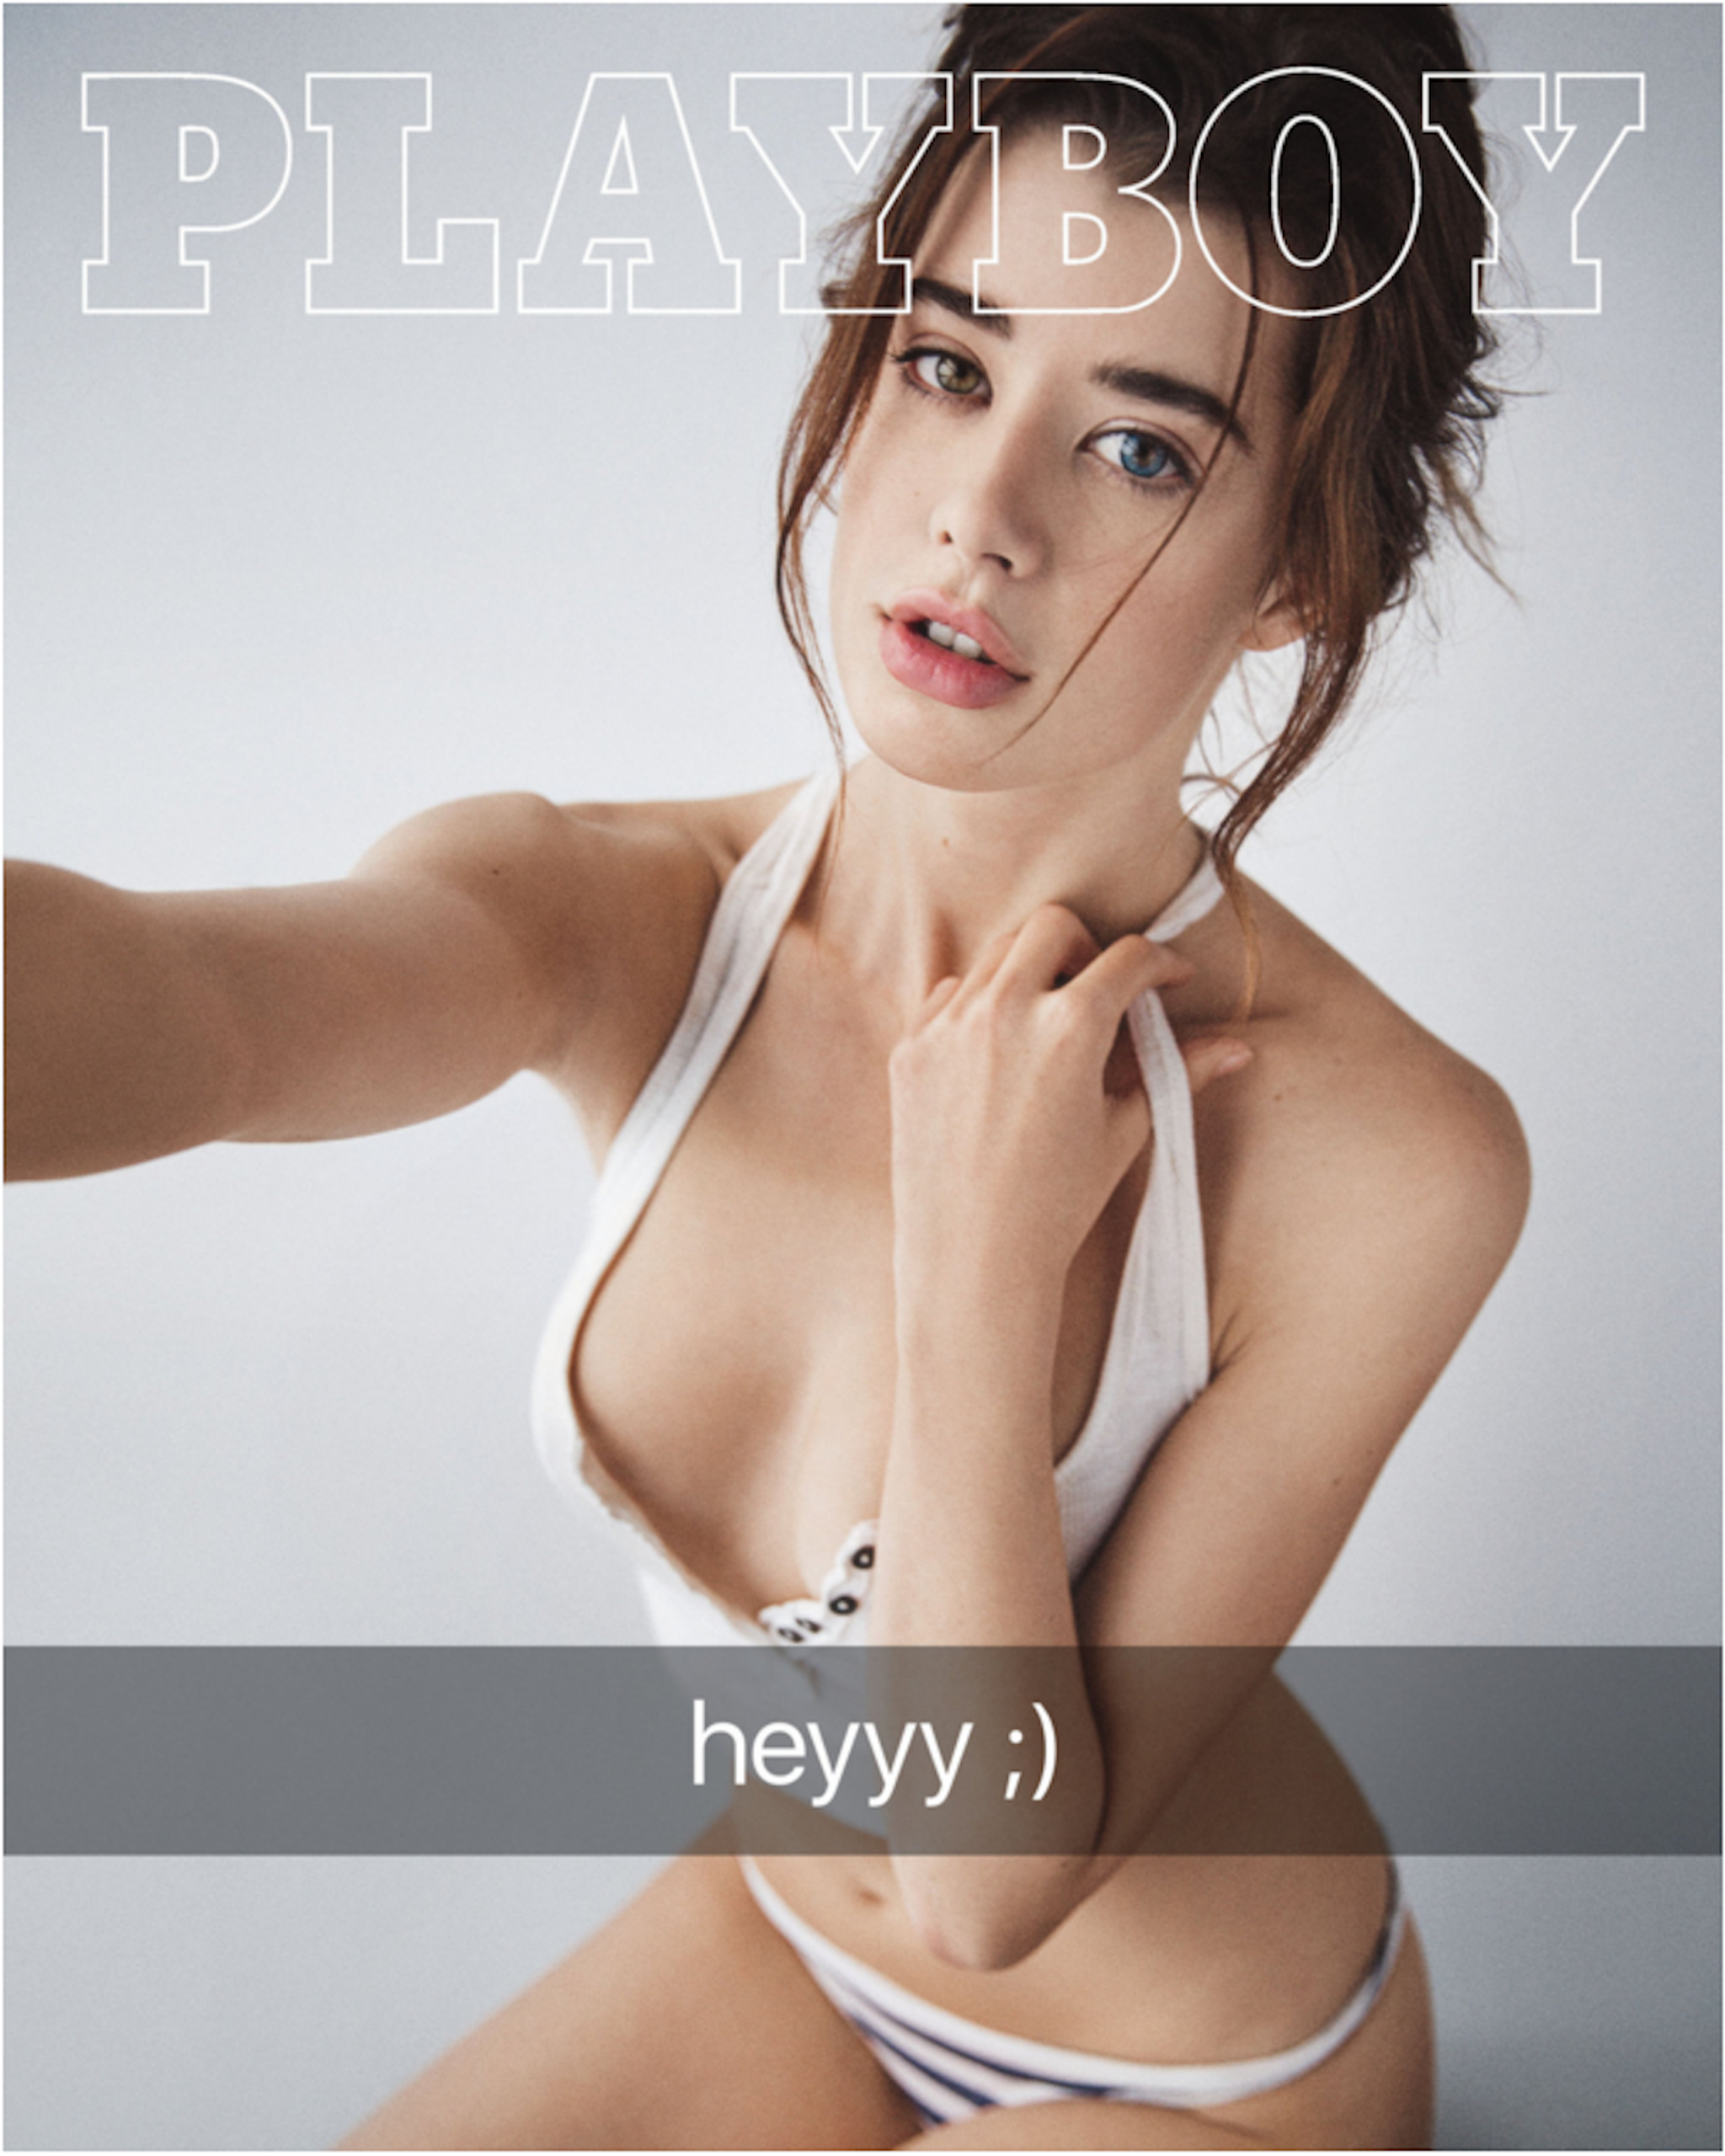 Playboy cover features a Snapchat-inspired shoot